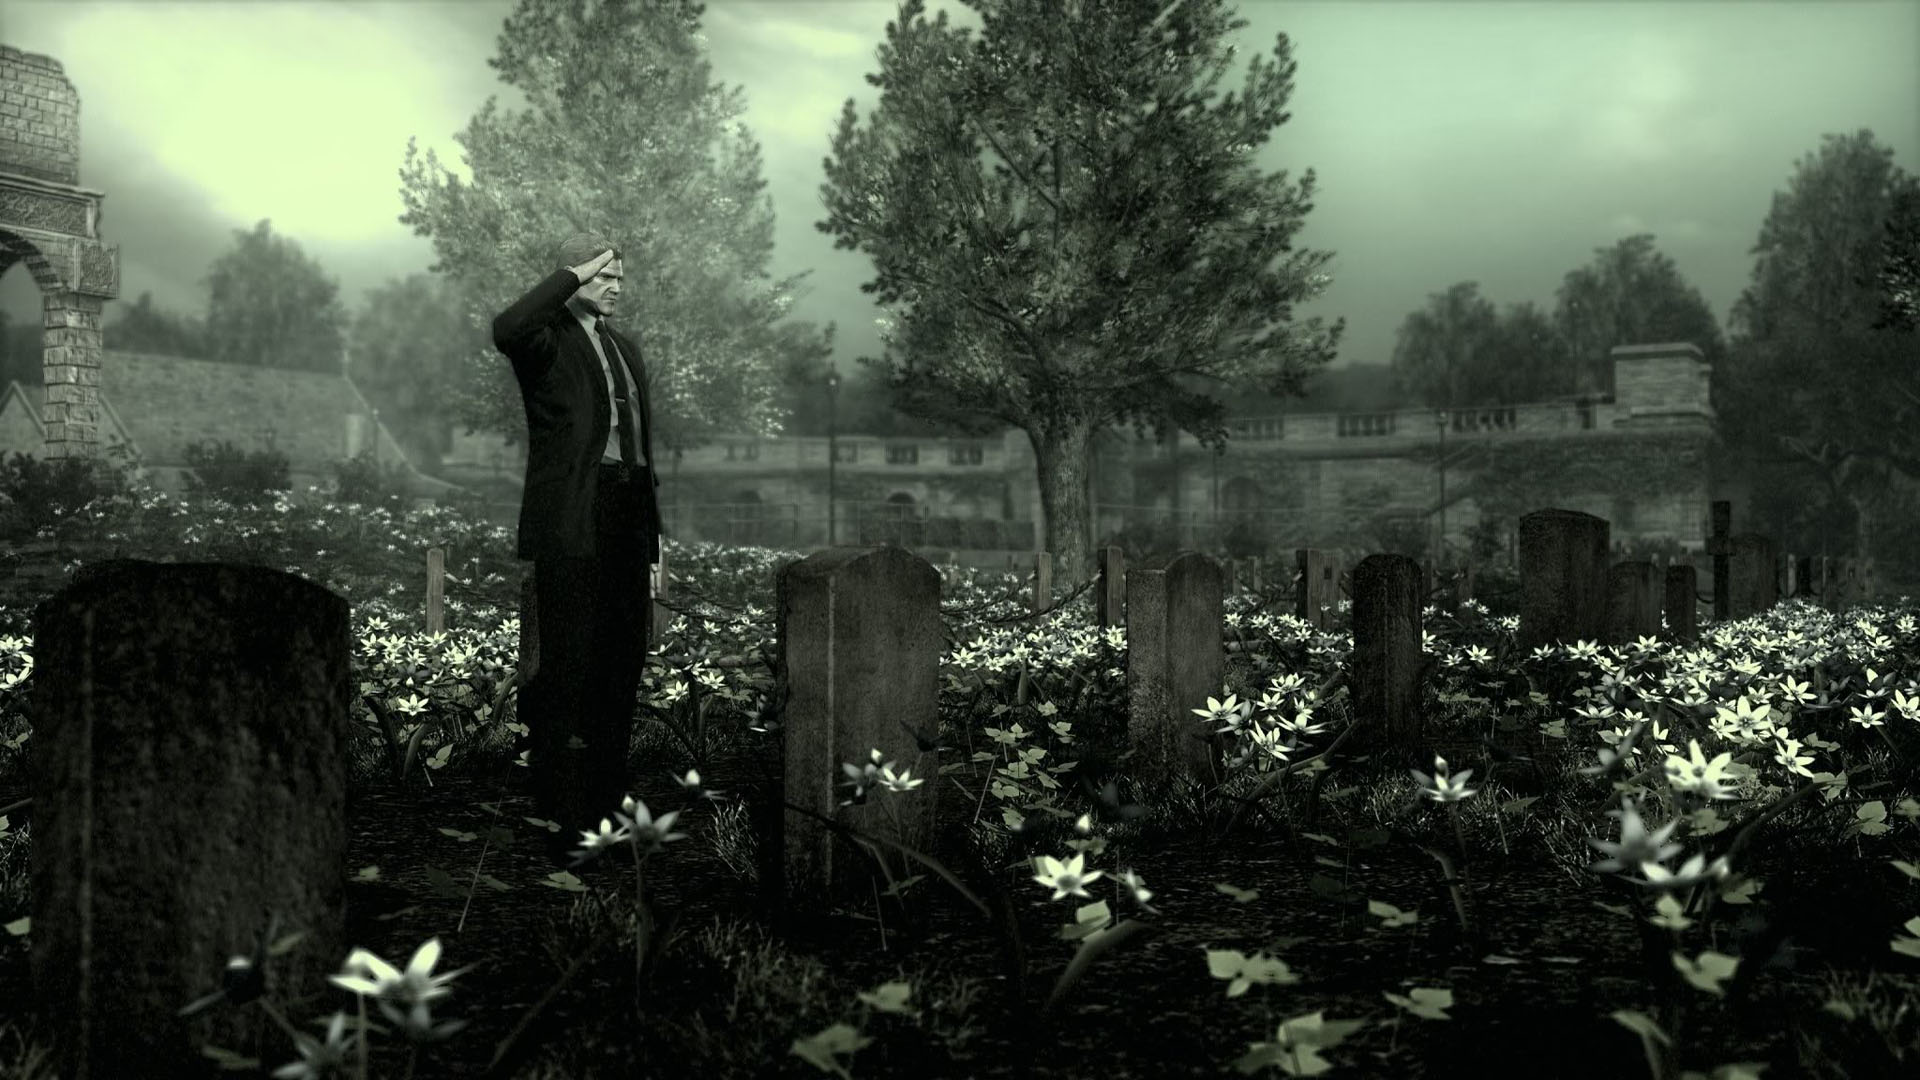 Saluting At The Graves - Metal Gear Solid 4 Funeral - HD Wallpaper 